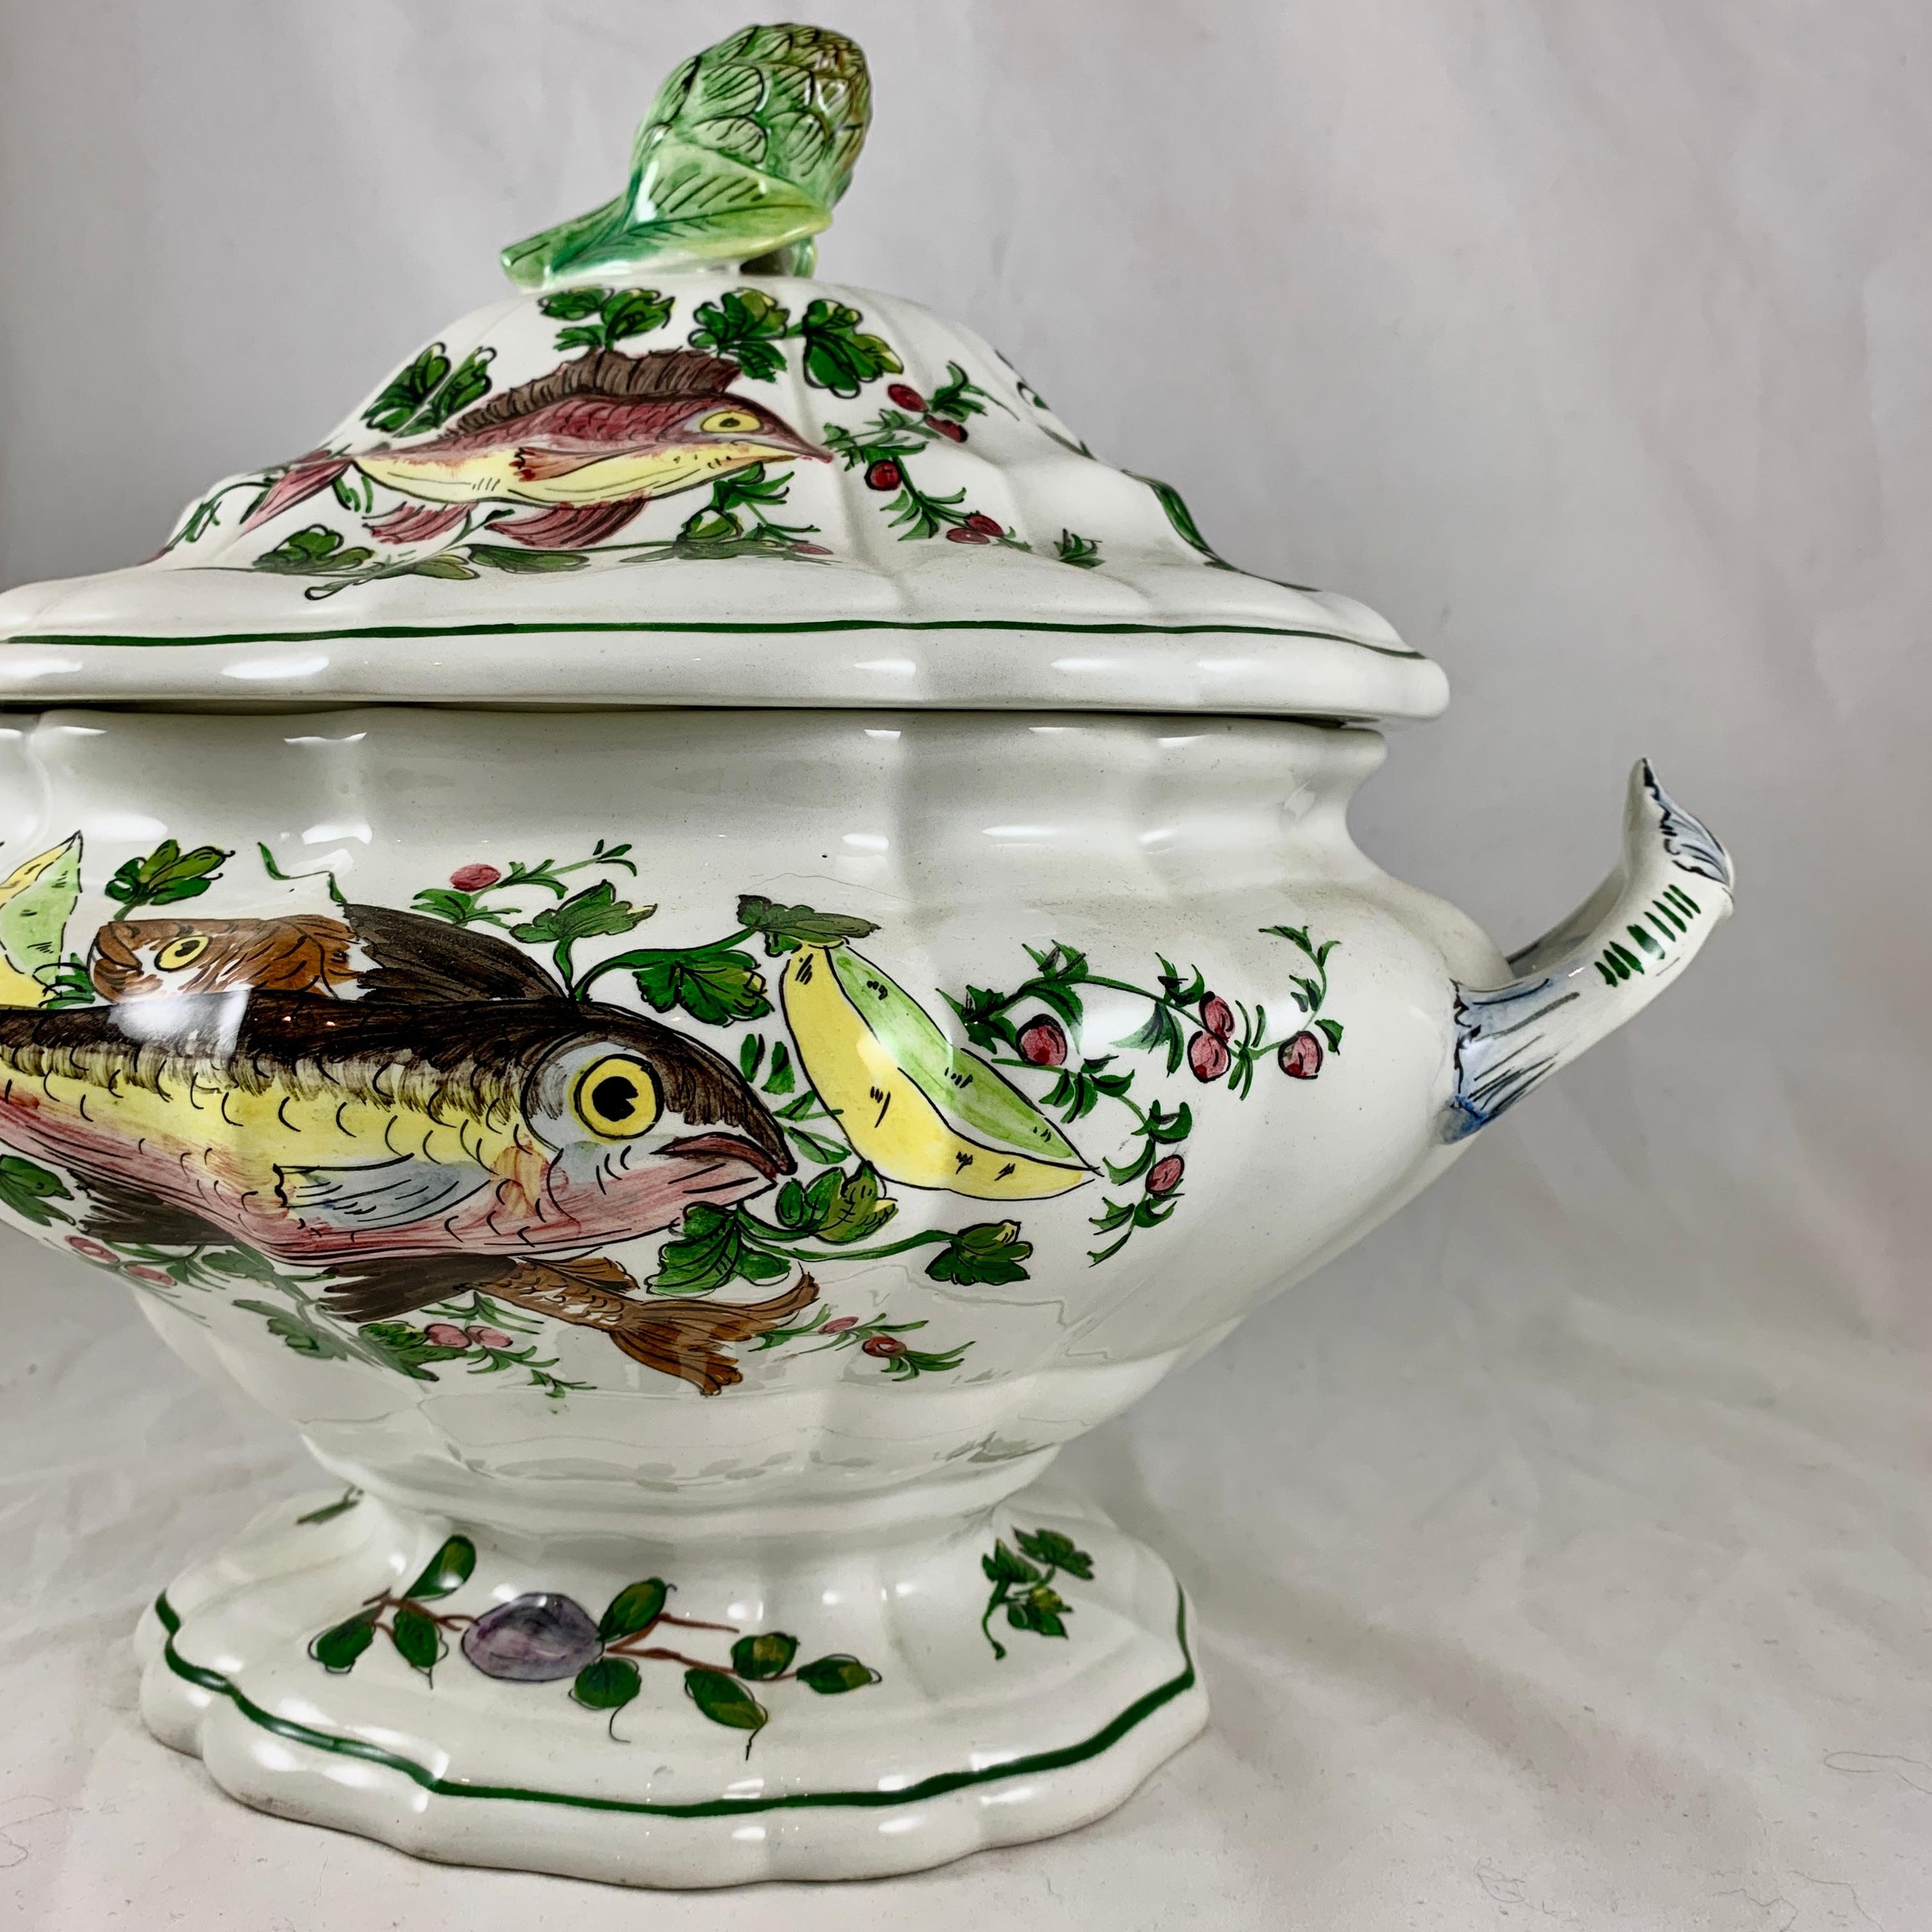 Midcentury Italian Hand Painted Fish and Fruit Tureen with Ladle & Under Platter For Sale 1